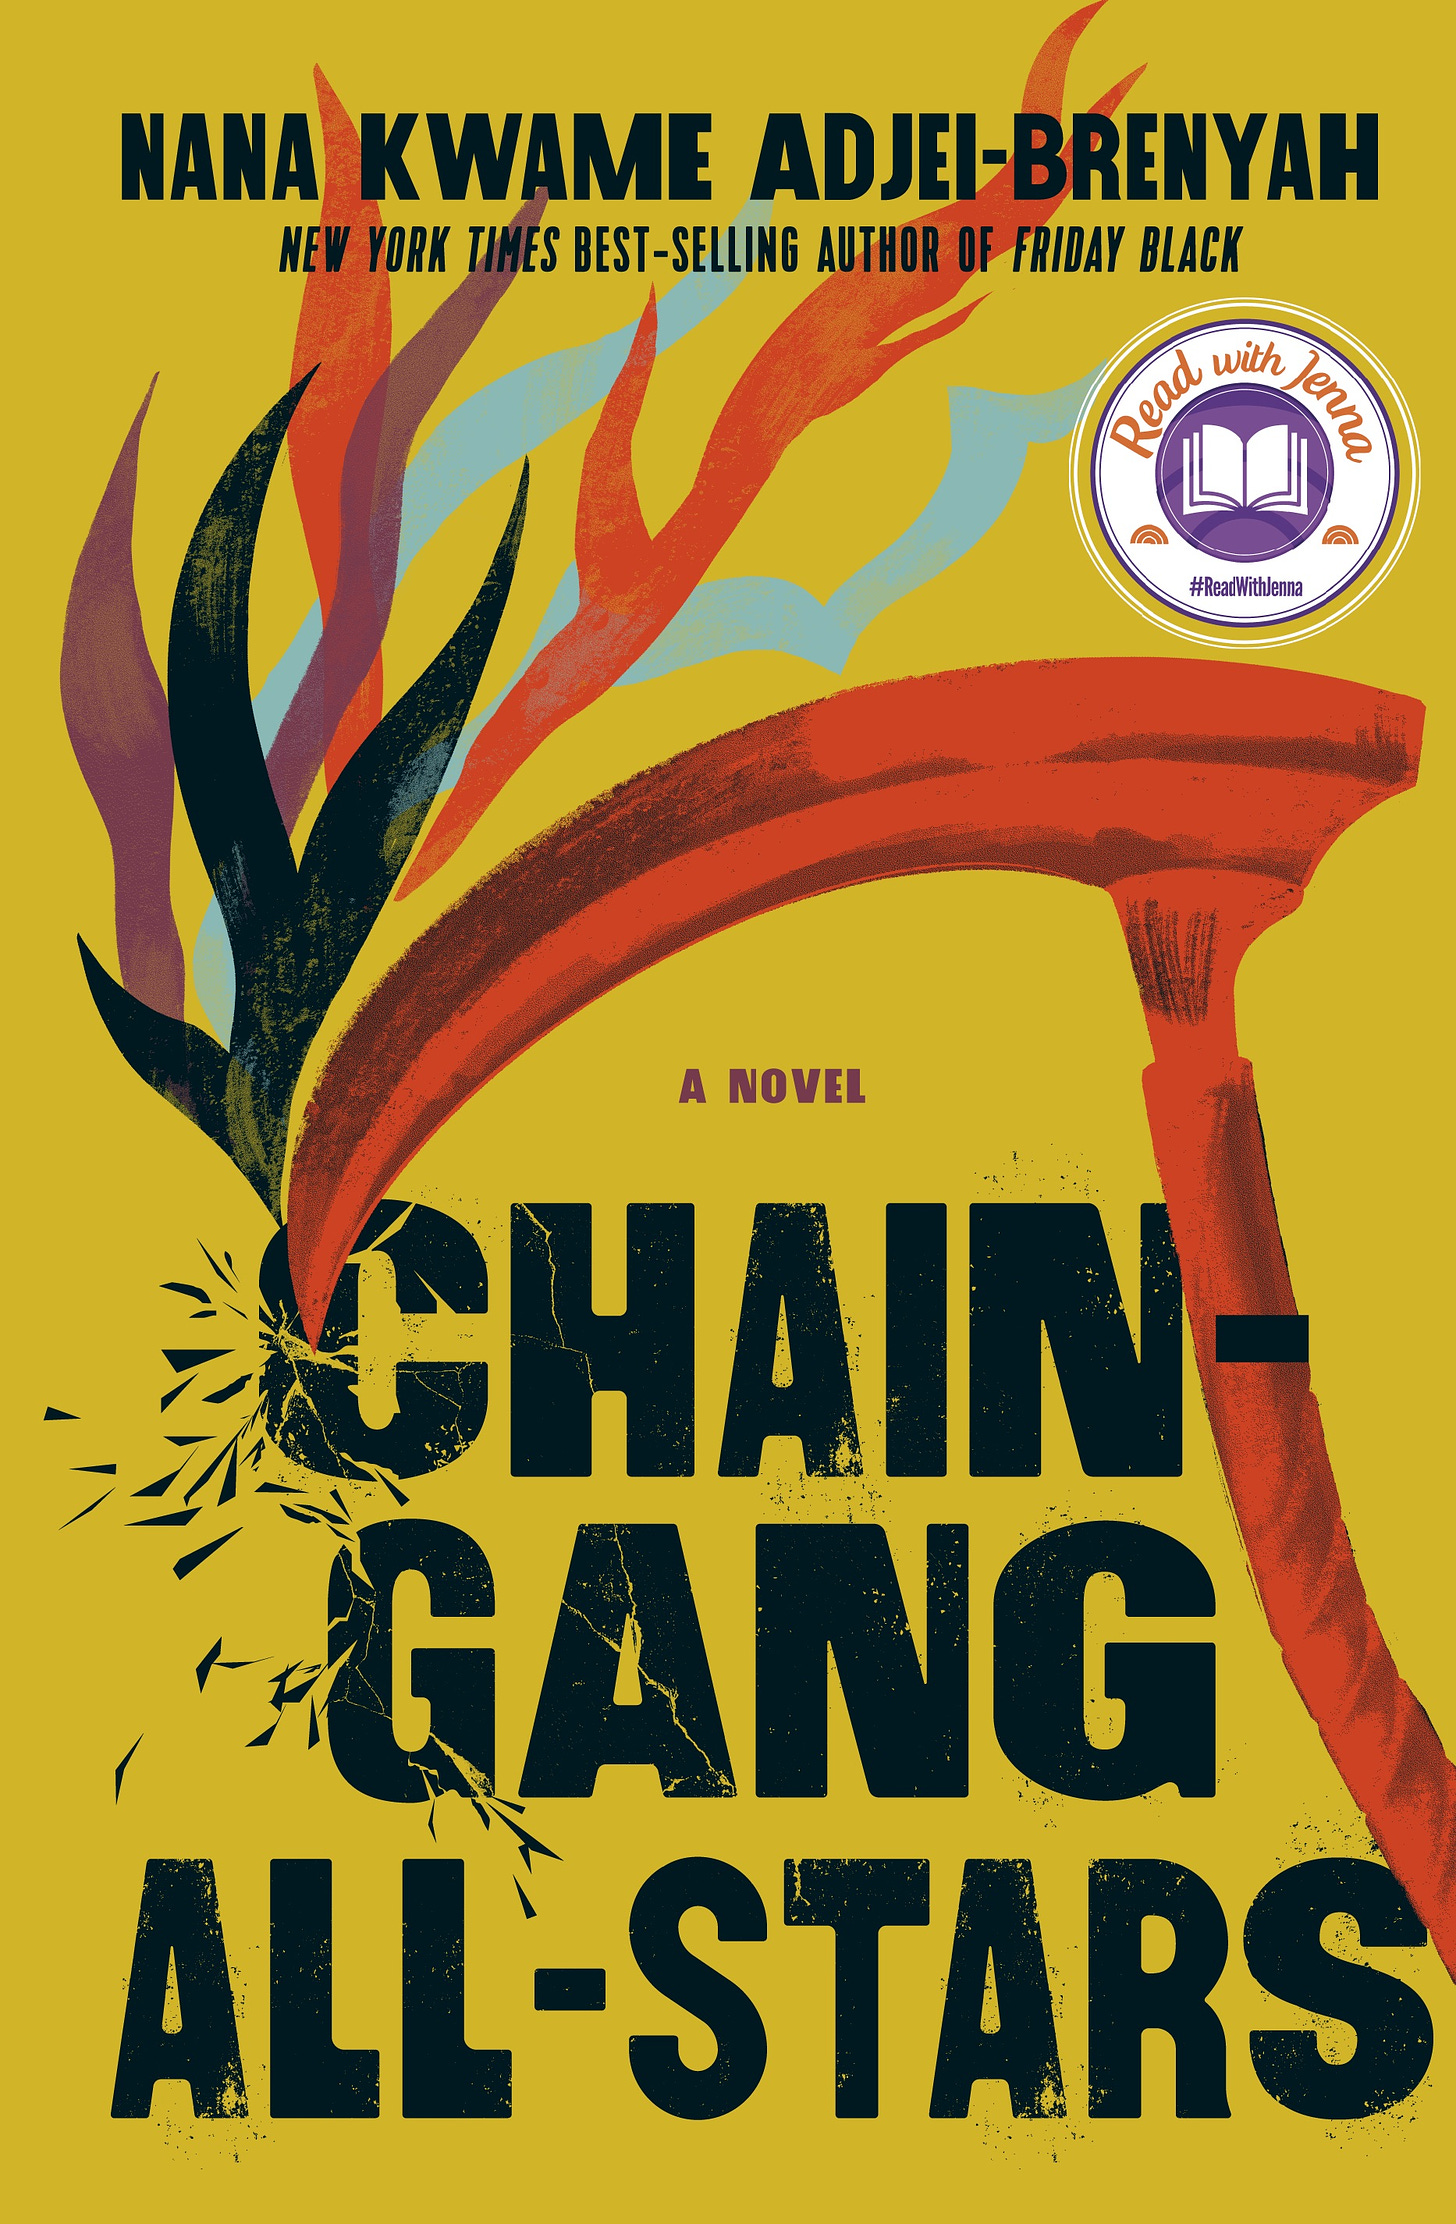 The cover for Chain Gang All-Stars by Nan Kwame Adjei-Brenyah. The background is a mustard color and there is a large red scythe across the center of the cover with different colored flames at the tip of the blade. Beneath the blade, the book's title in all caps, black lettering.